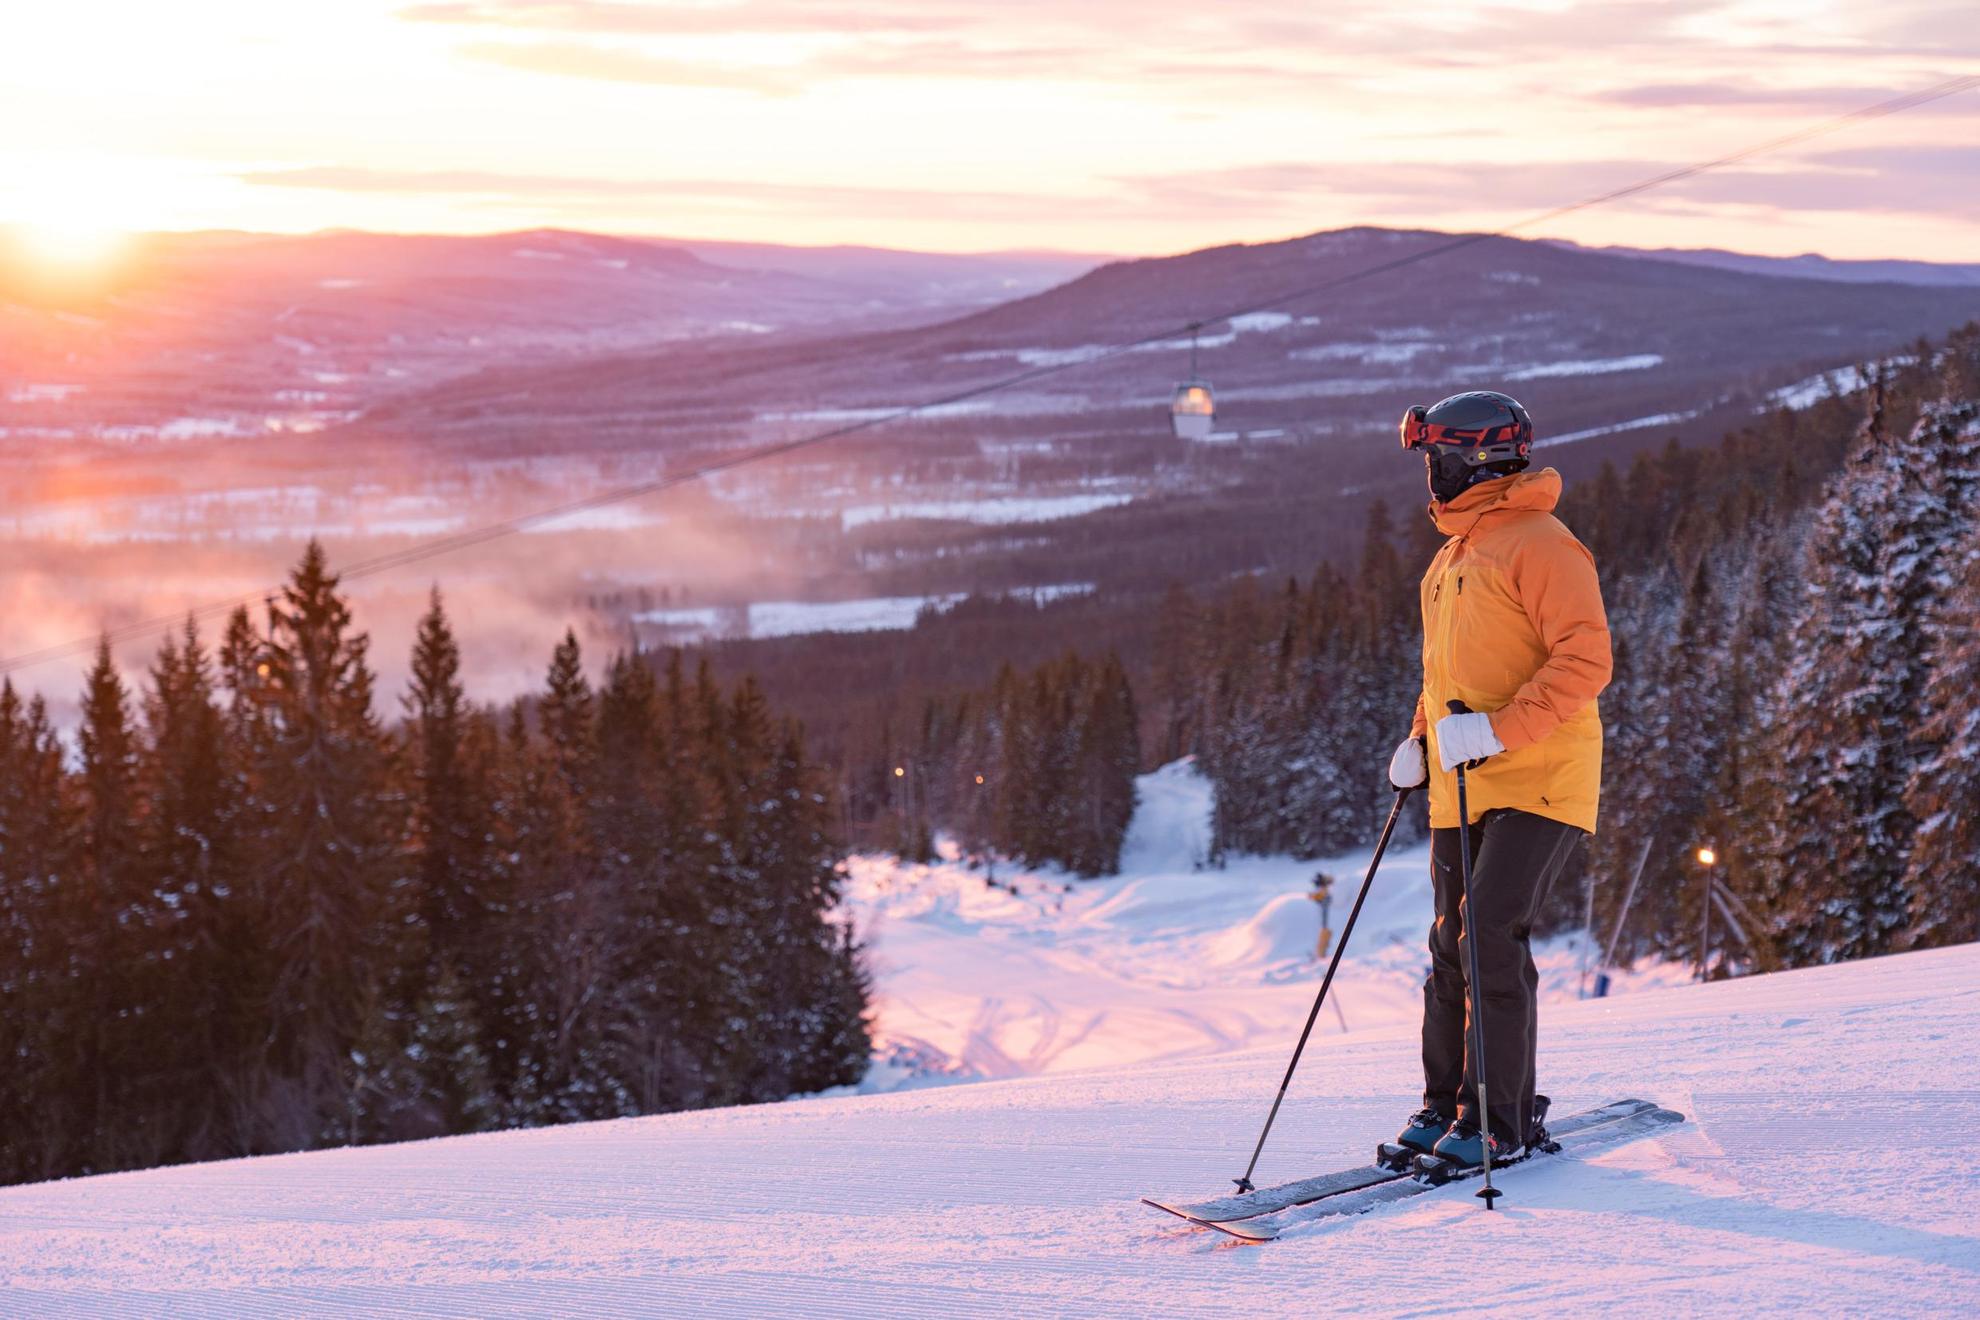 A person with ski gear is standing on a ski slope looking at the sunset.